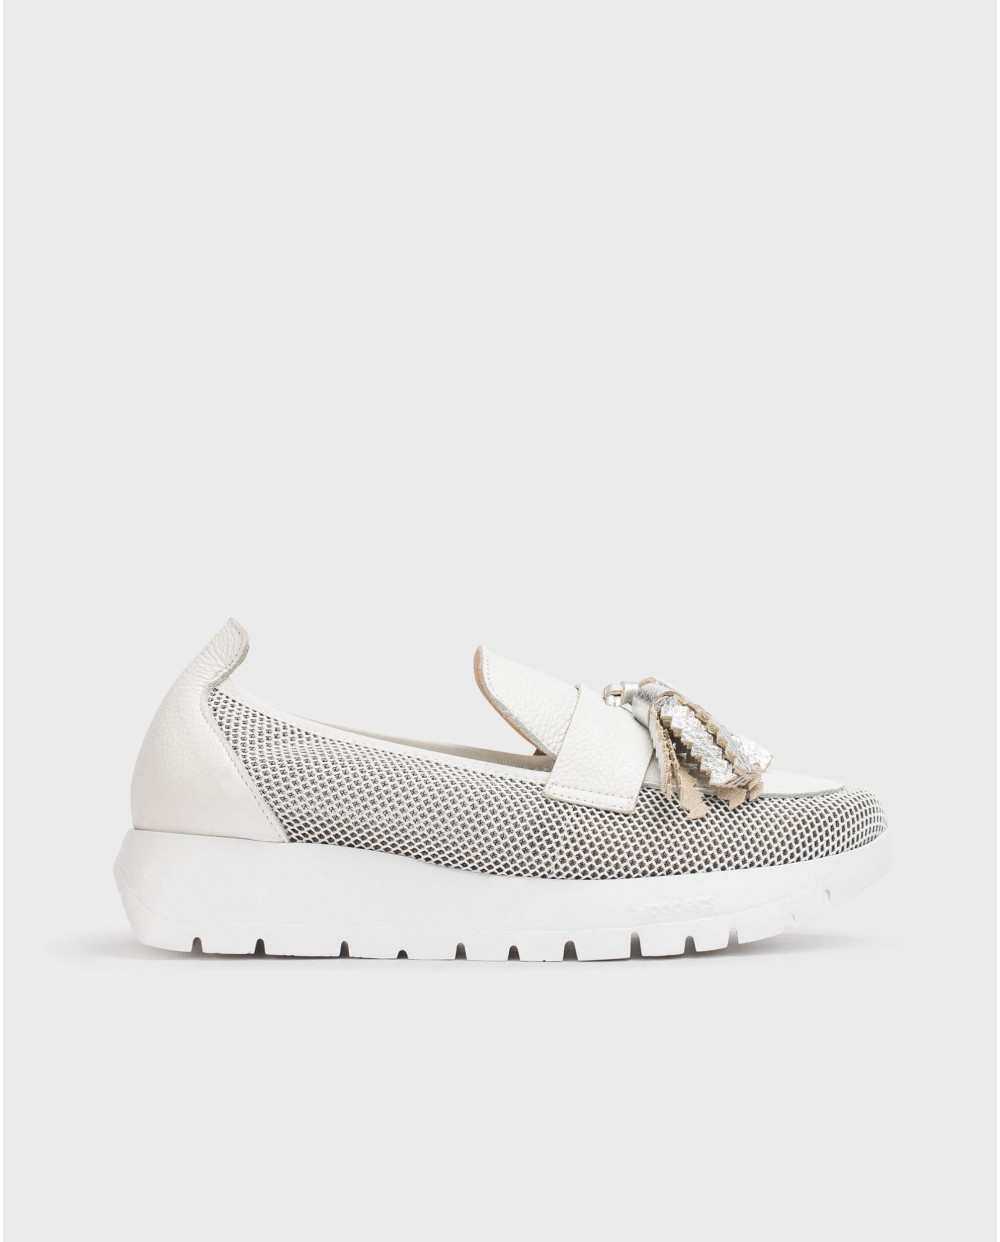 Wonders-Loafers-White Materia moccasin